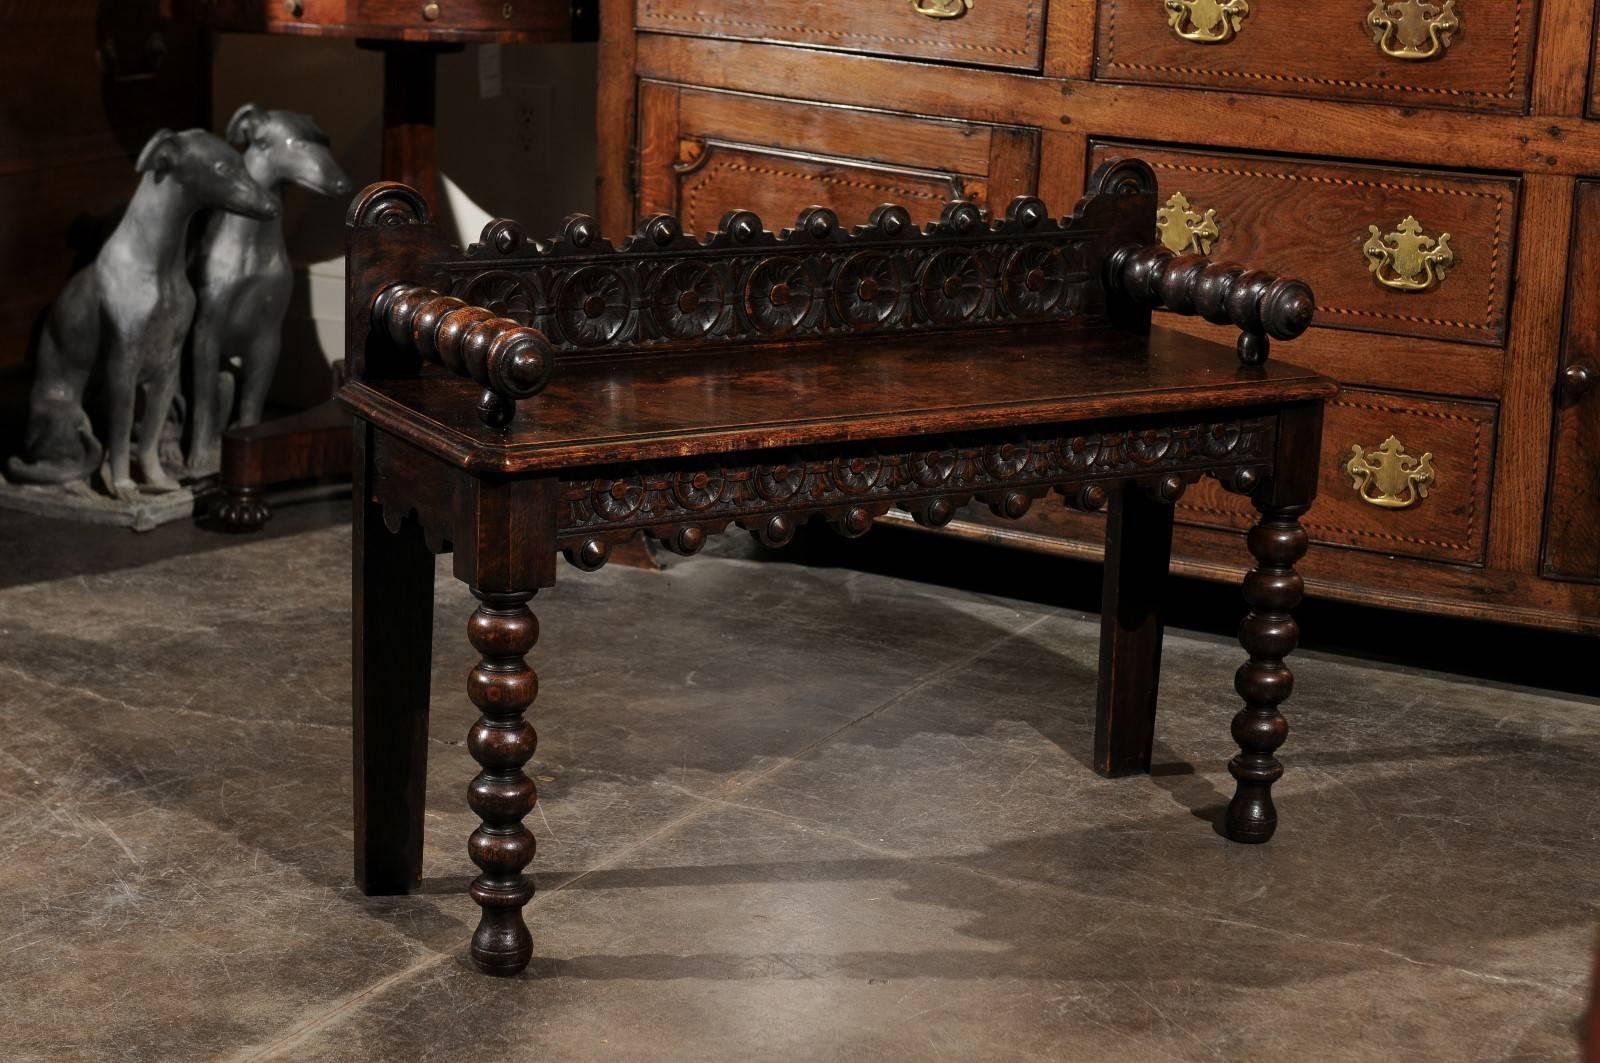 This exquisite English wooden window bench features a low carved back decorated with medallions, a decorative motif that is echoed in the front skirt. The single plank wooden seat is chamfered on the sides. The spool arms and bobbin front legs